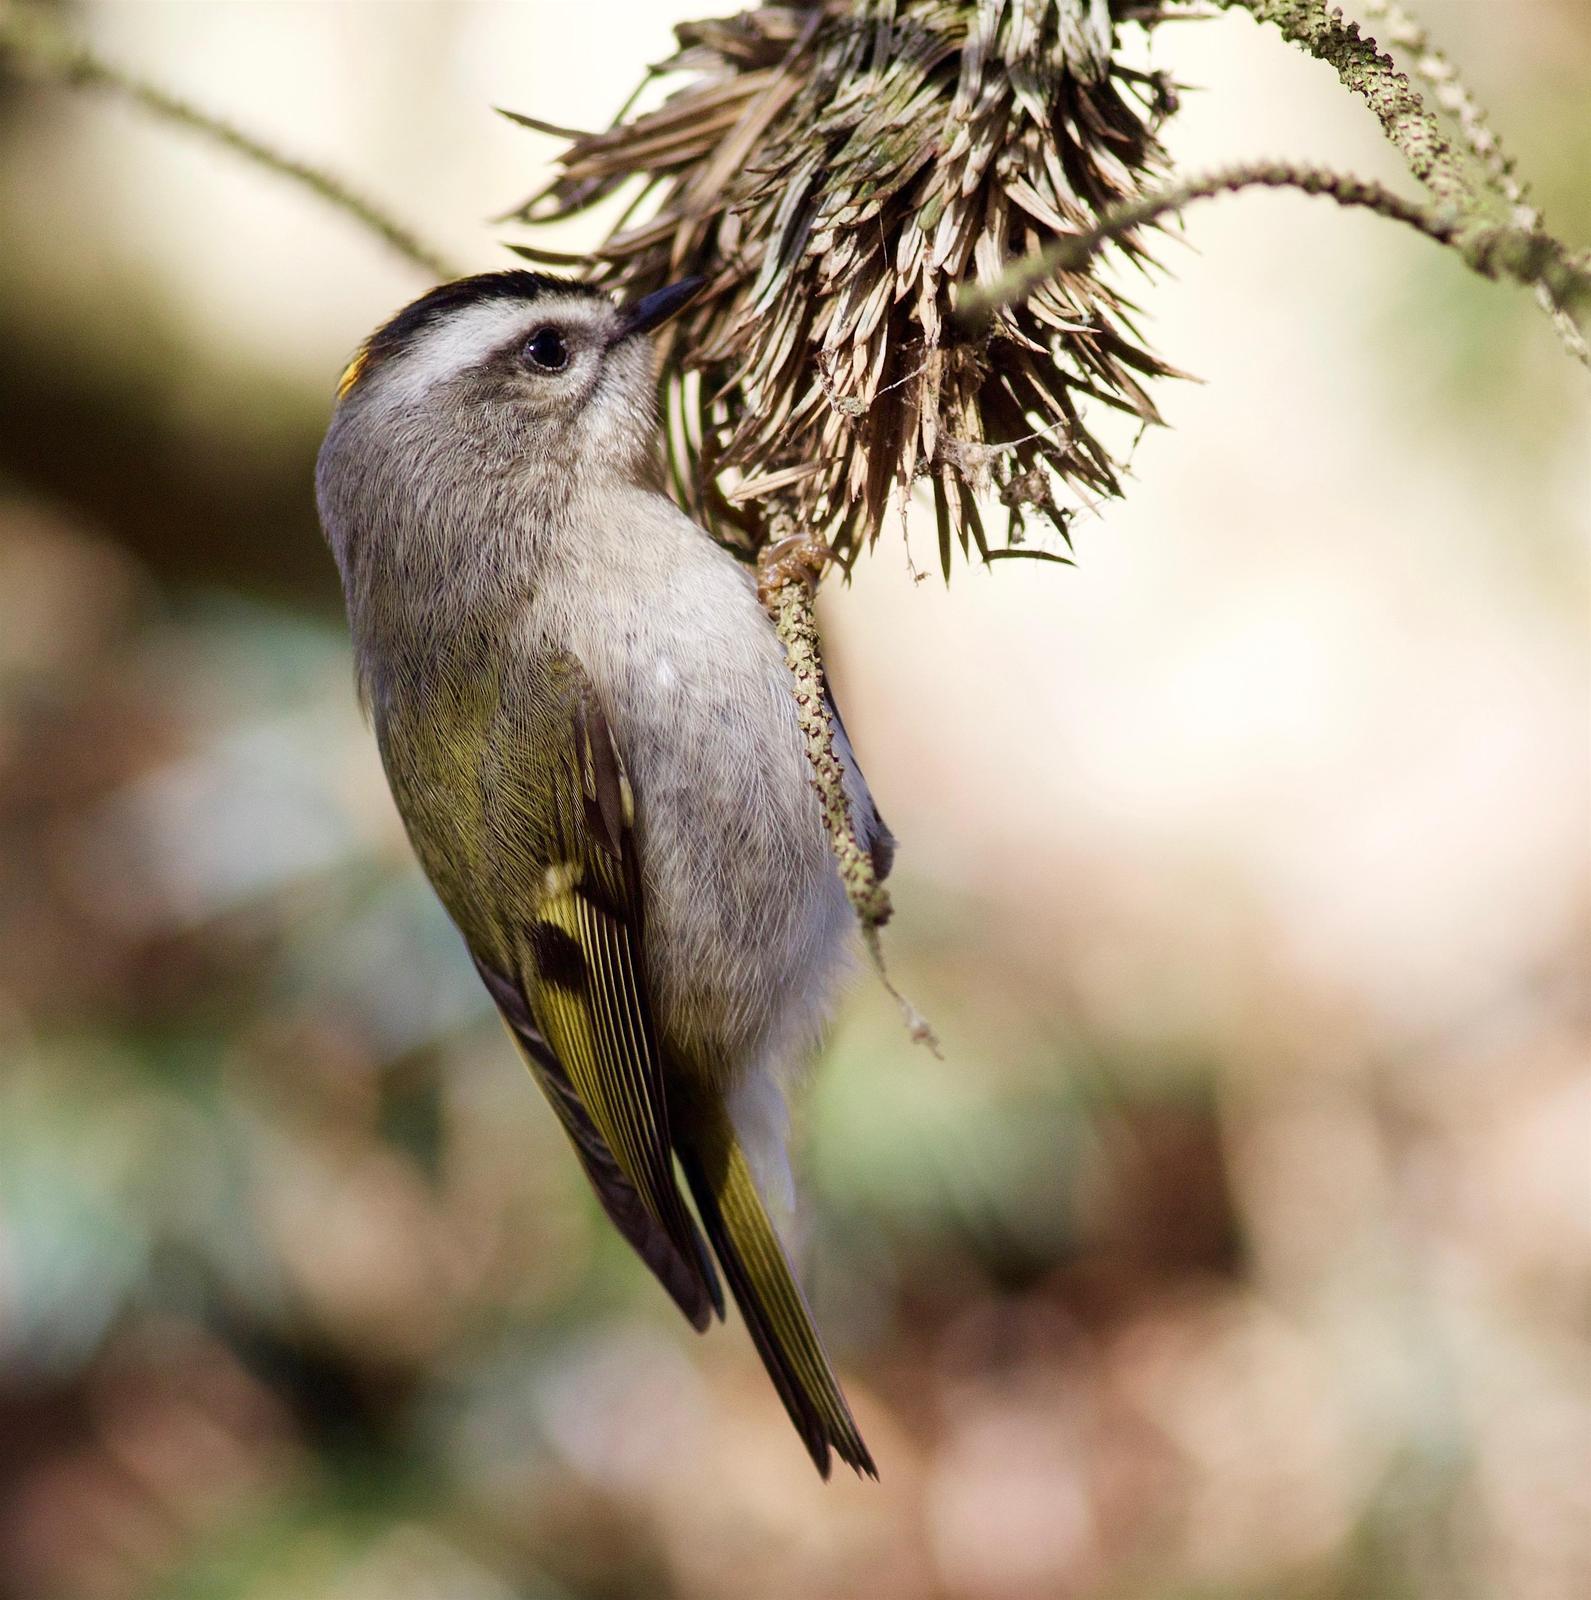 Golden-crowned Kinglet Photo by Kathryn Keith